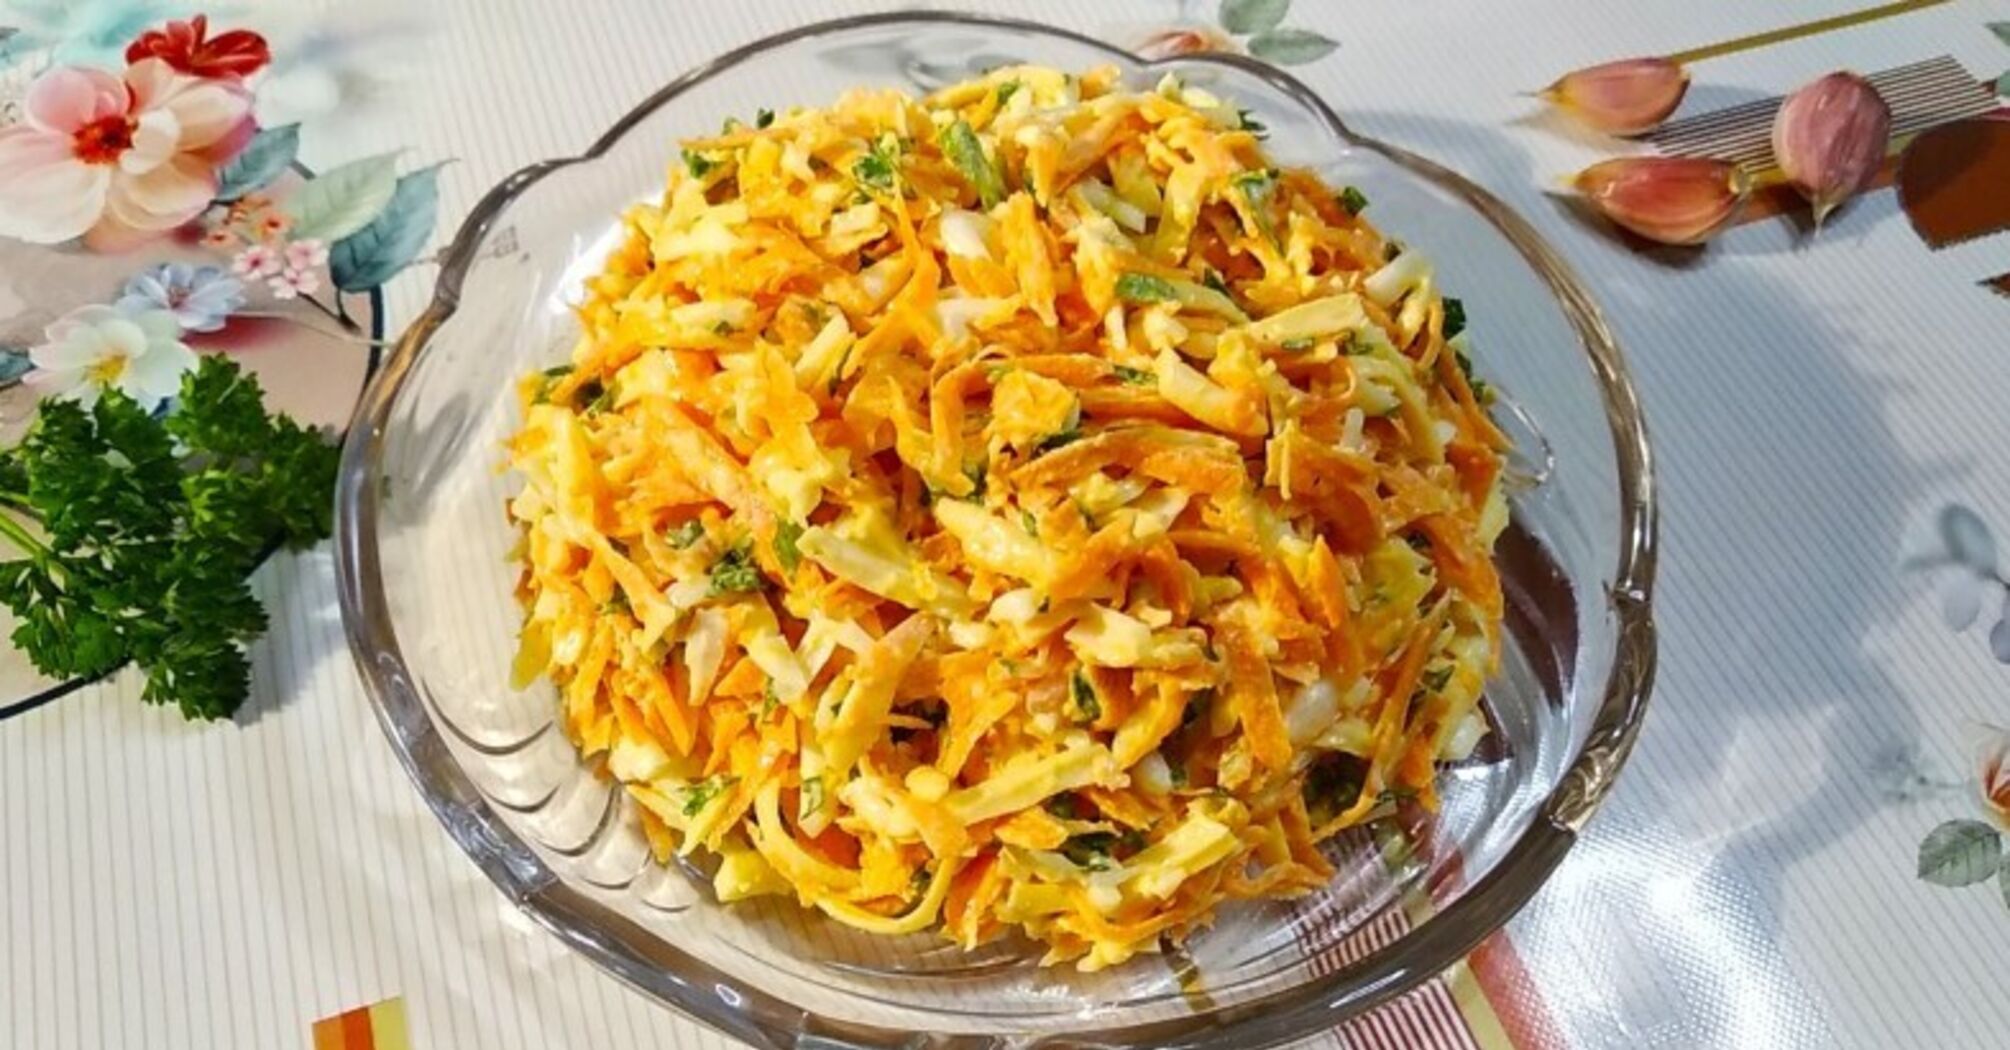 How to quickly make a salad with carrots and eggs